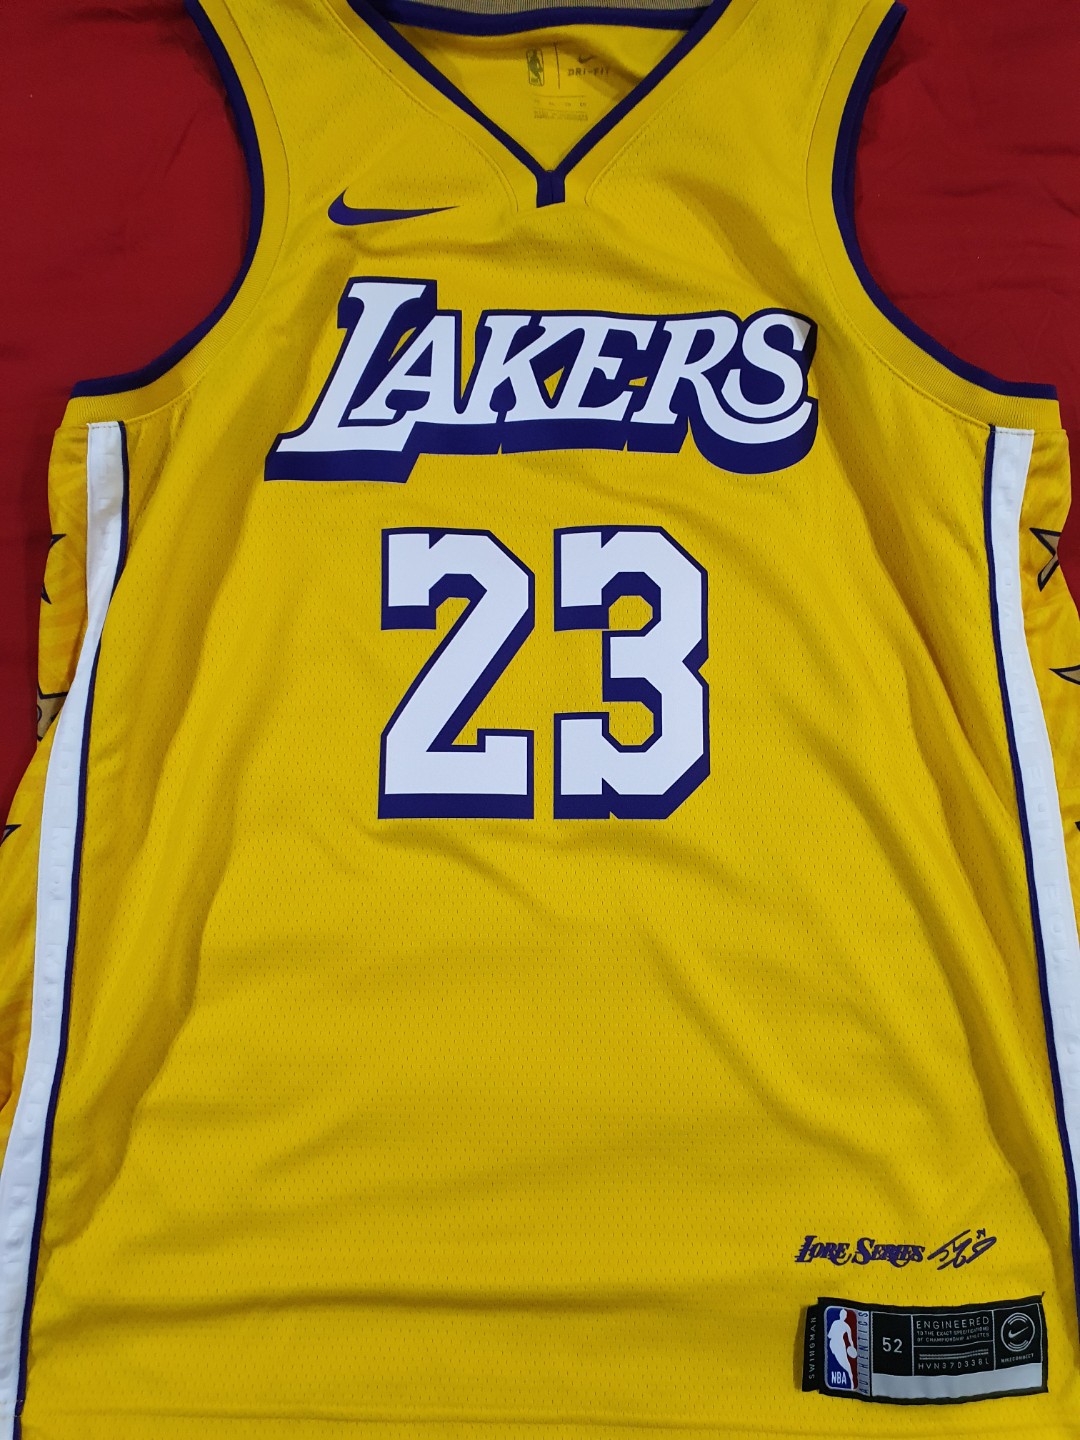 NBA Authentic Nike LA Lakers City Edition 19/20 Jersey Size XL with LEBRON  JAMES #23, Men's Fashion, Activewear on Carousell